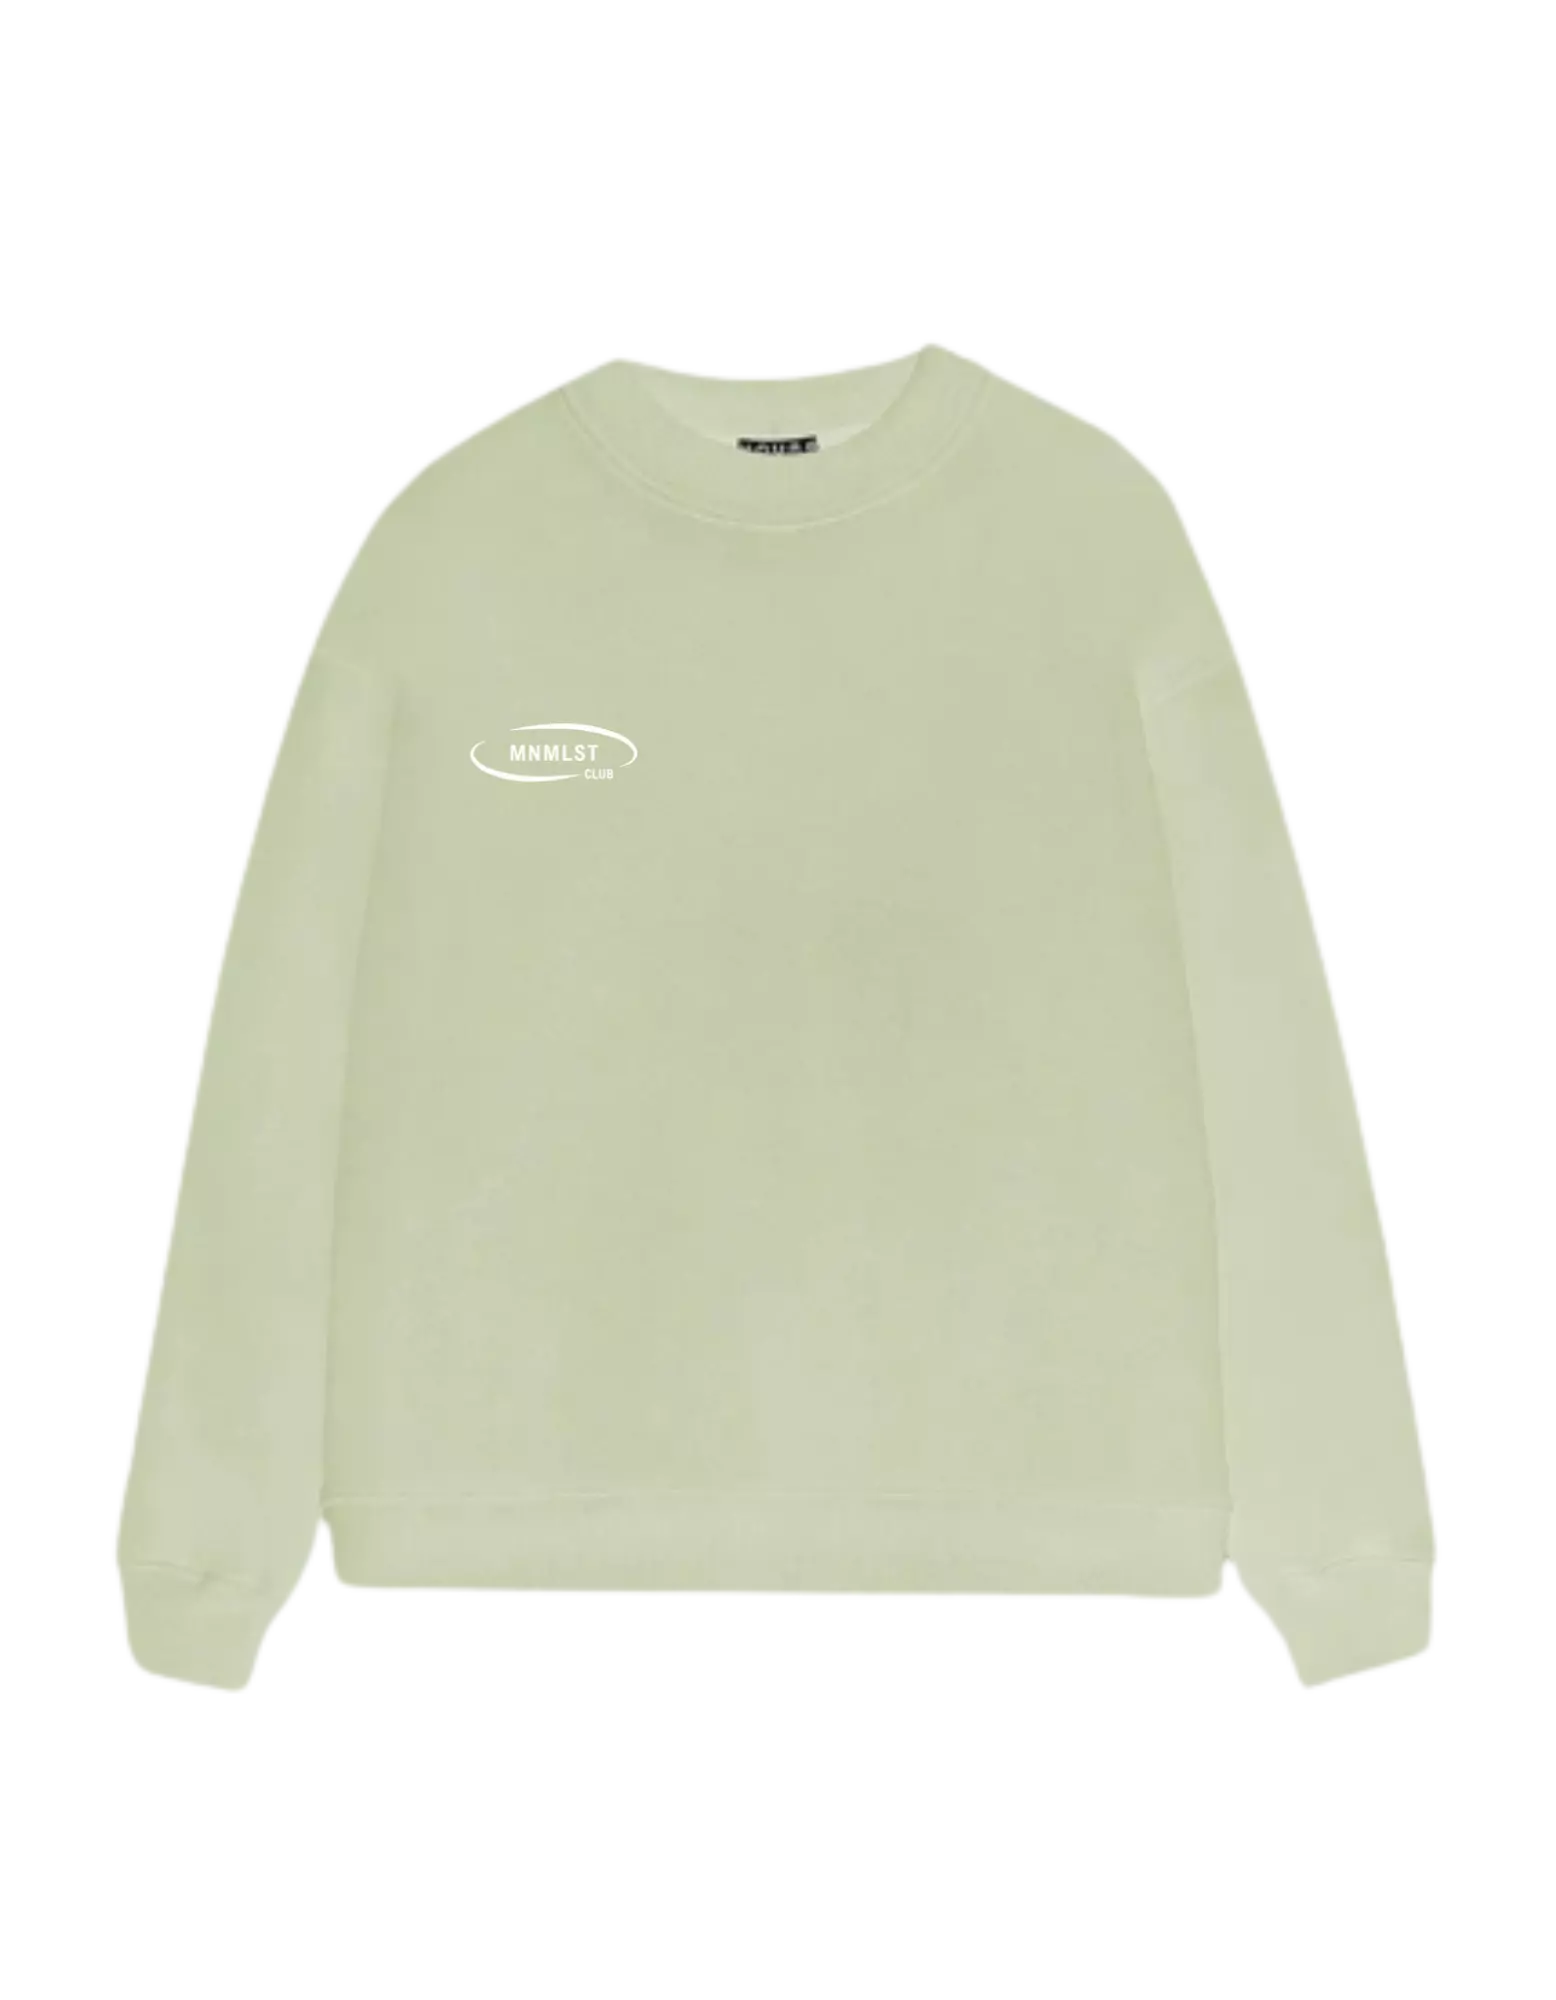 <h3><span style="color: rgb(255, 255, 255)">Crewneck in mint green</span></h3><p><span style="color: rgb(255, 255, 255)">LE 700.00</span></p>